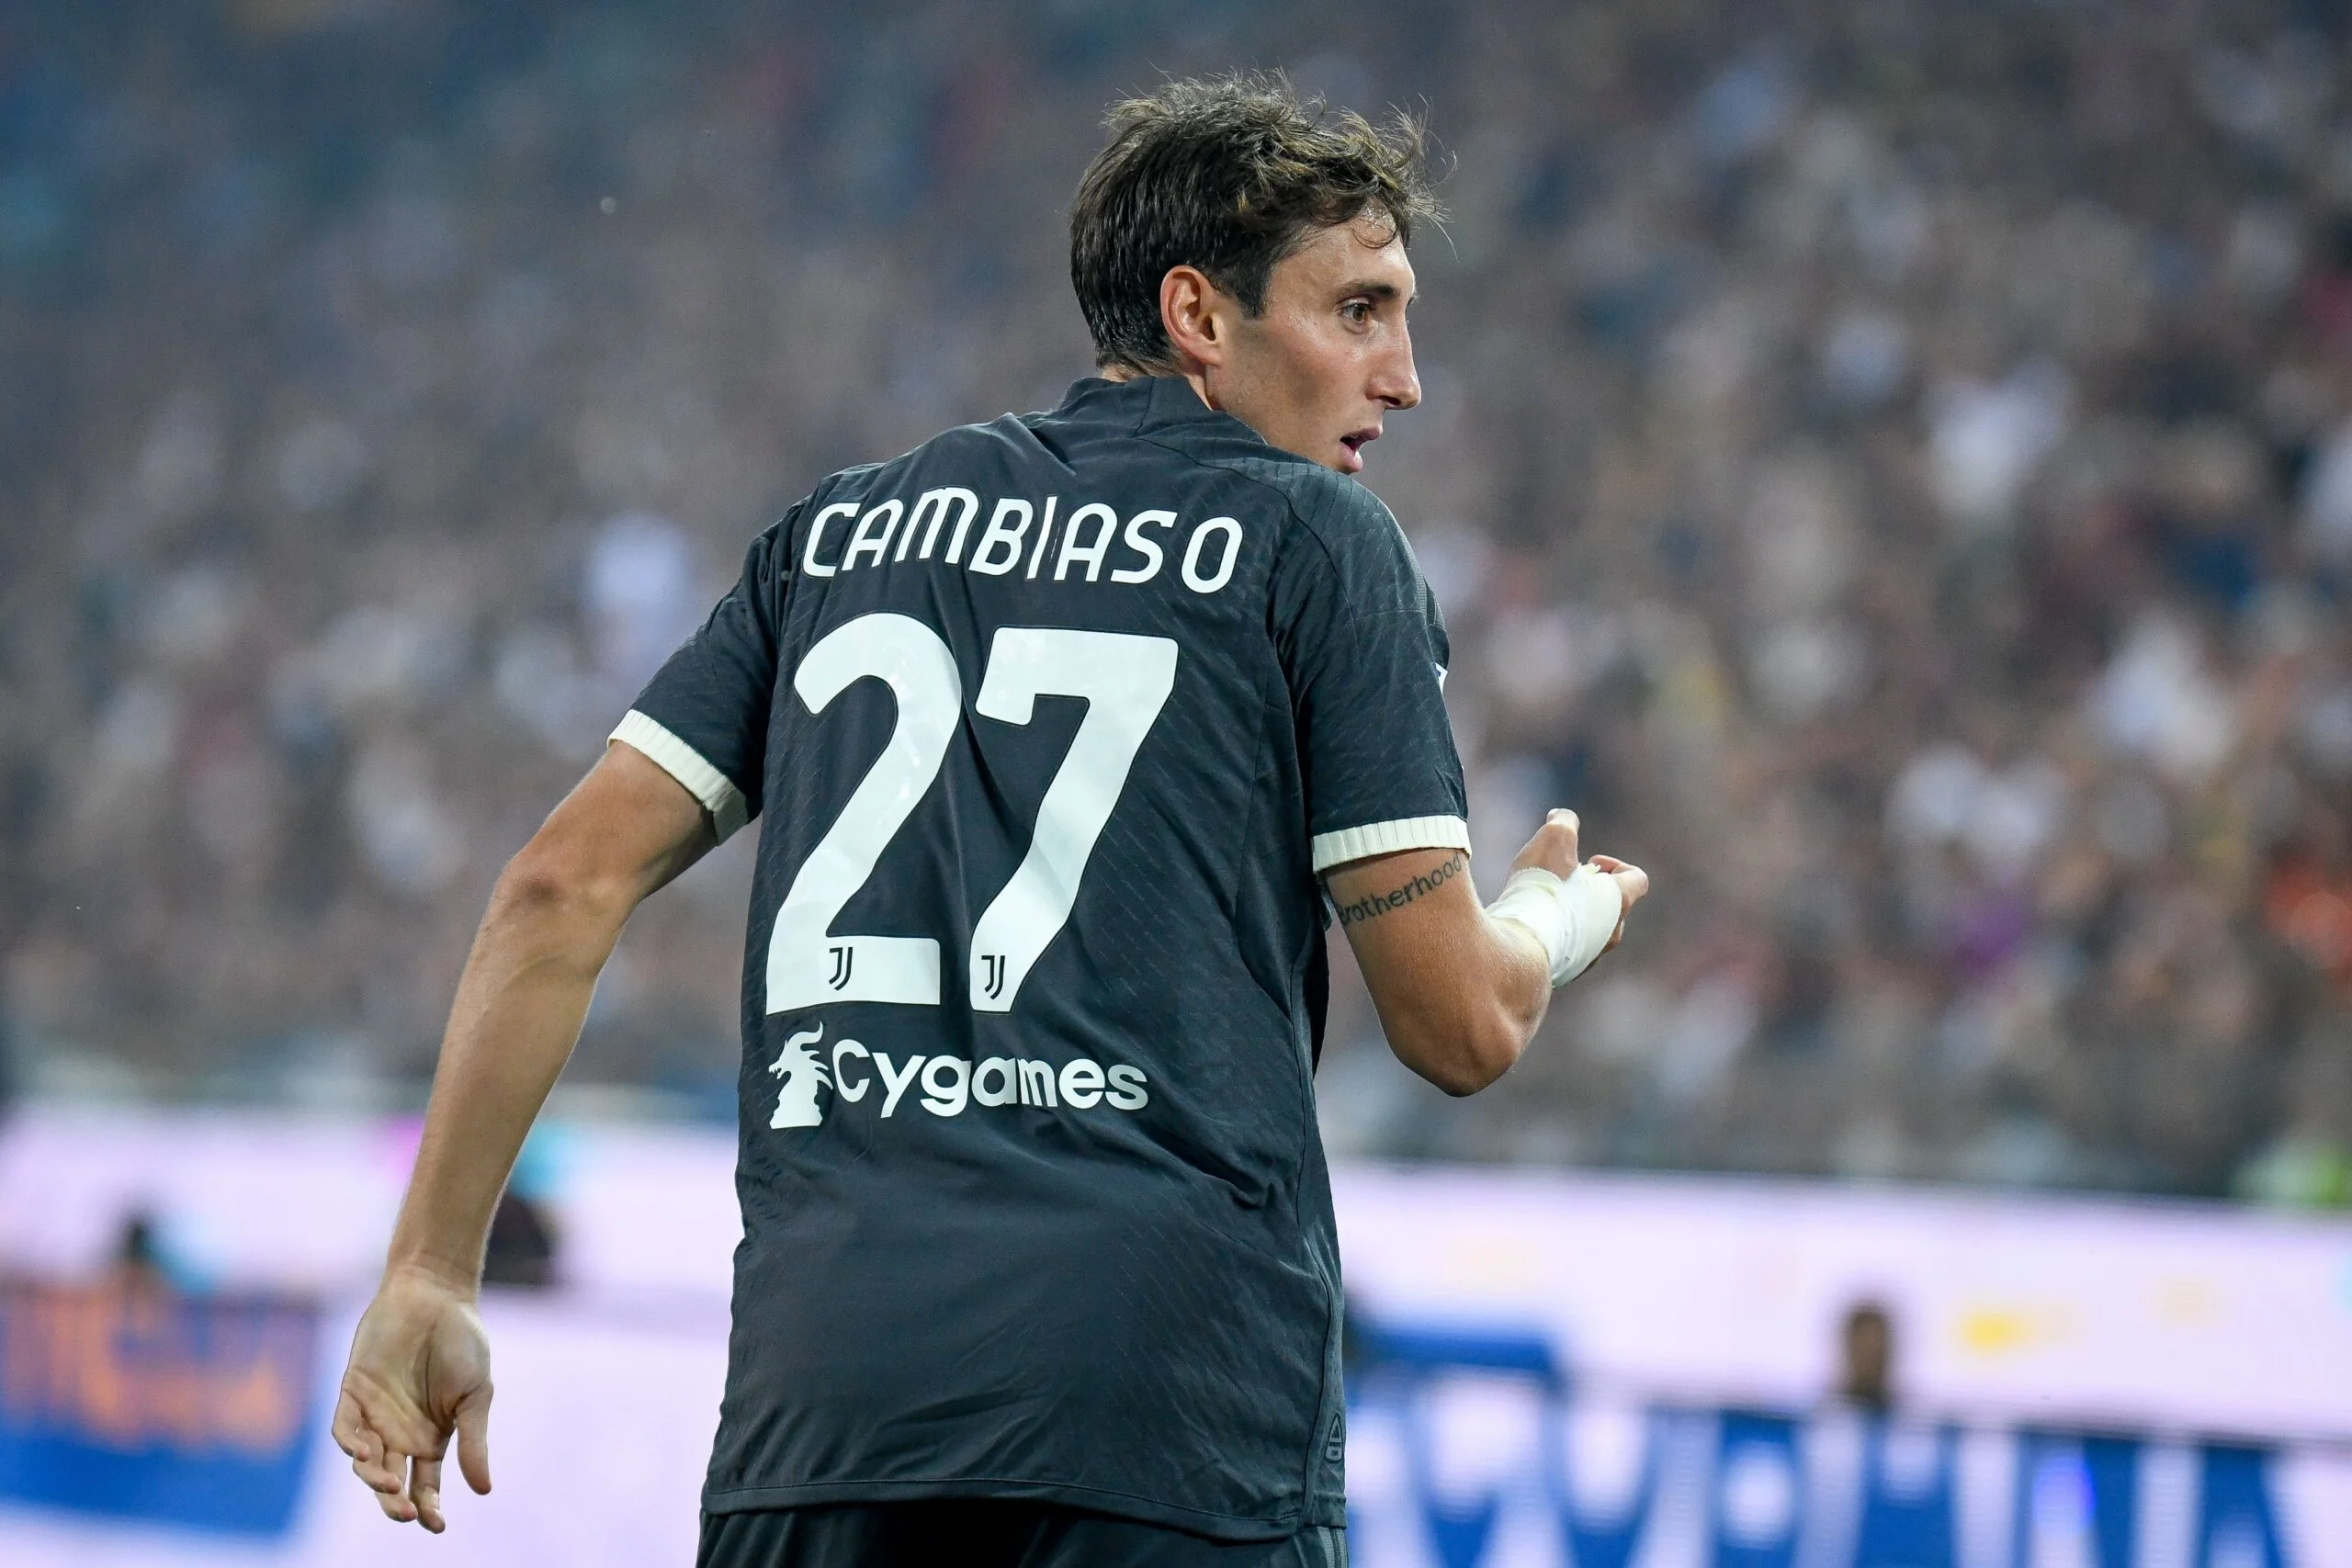 Andrea Cambiaso intends to set roots at Juventus after a solid first season in Turin. The fullback spoke to the press during a commercial event.